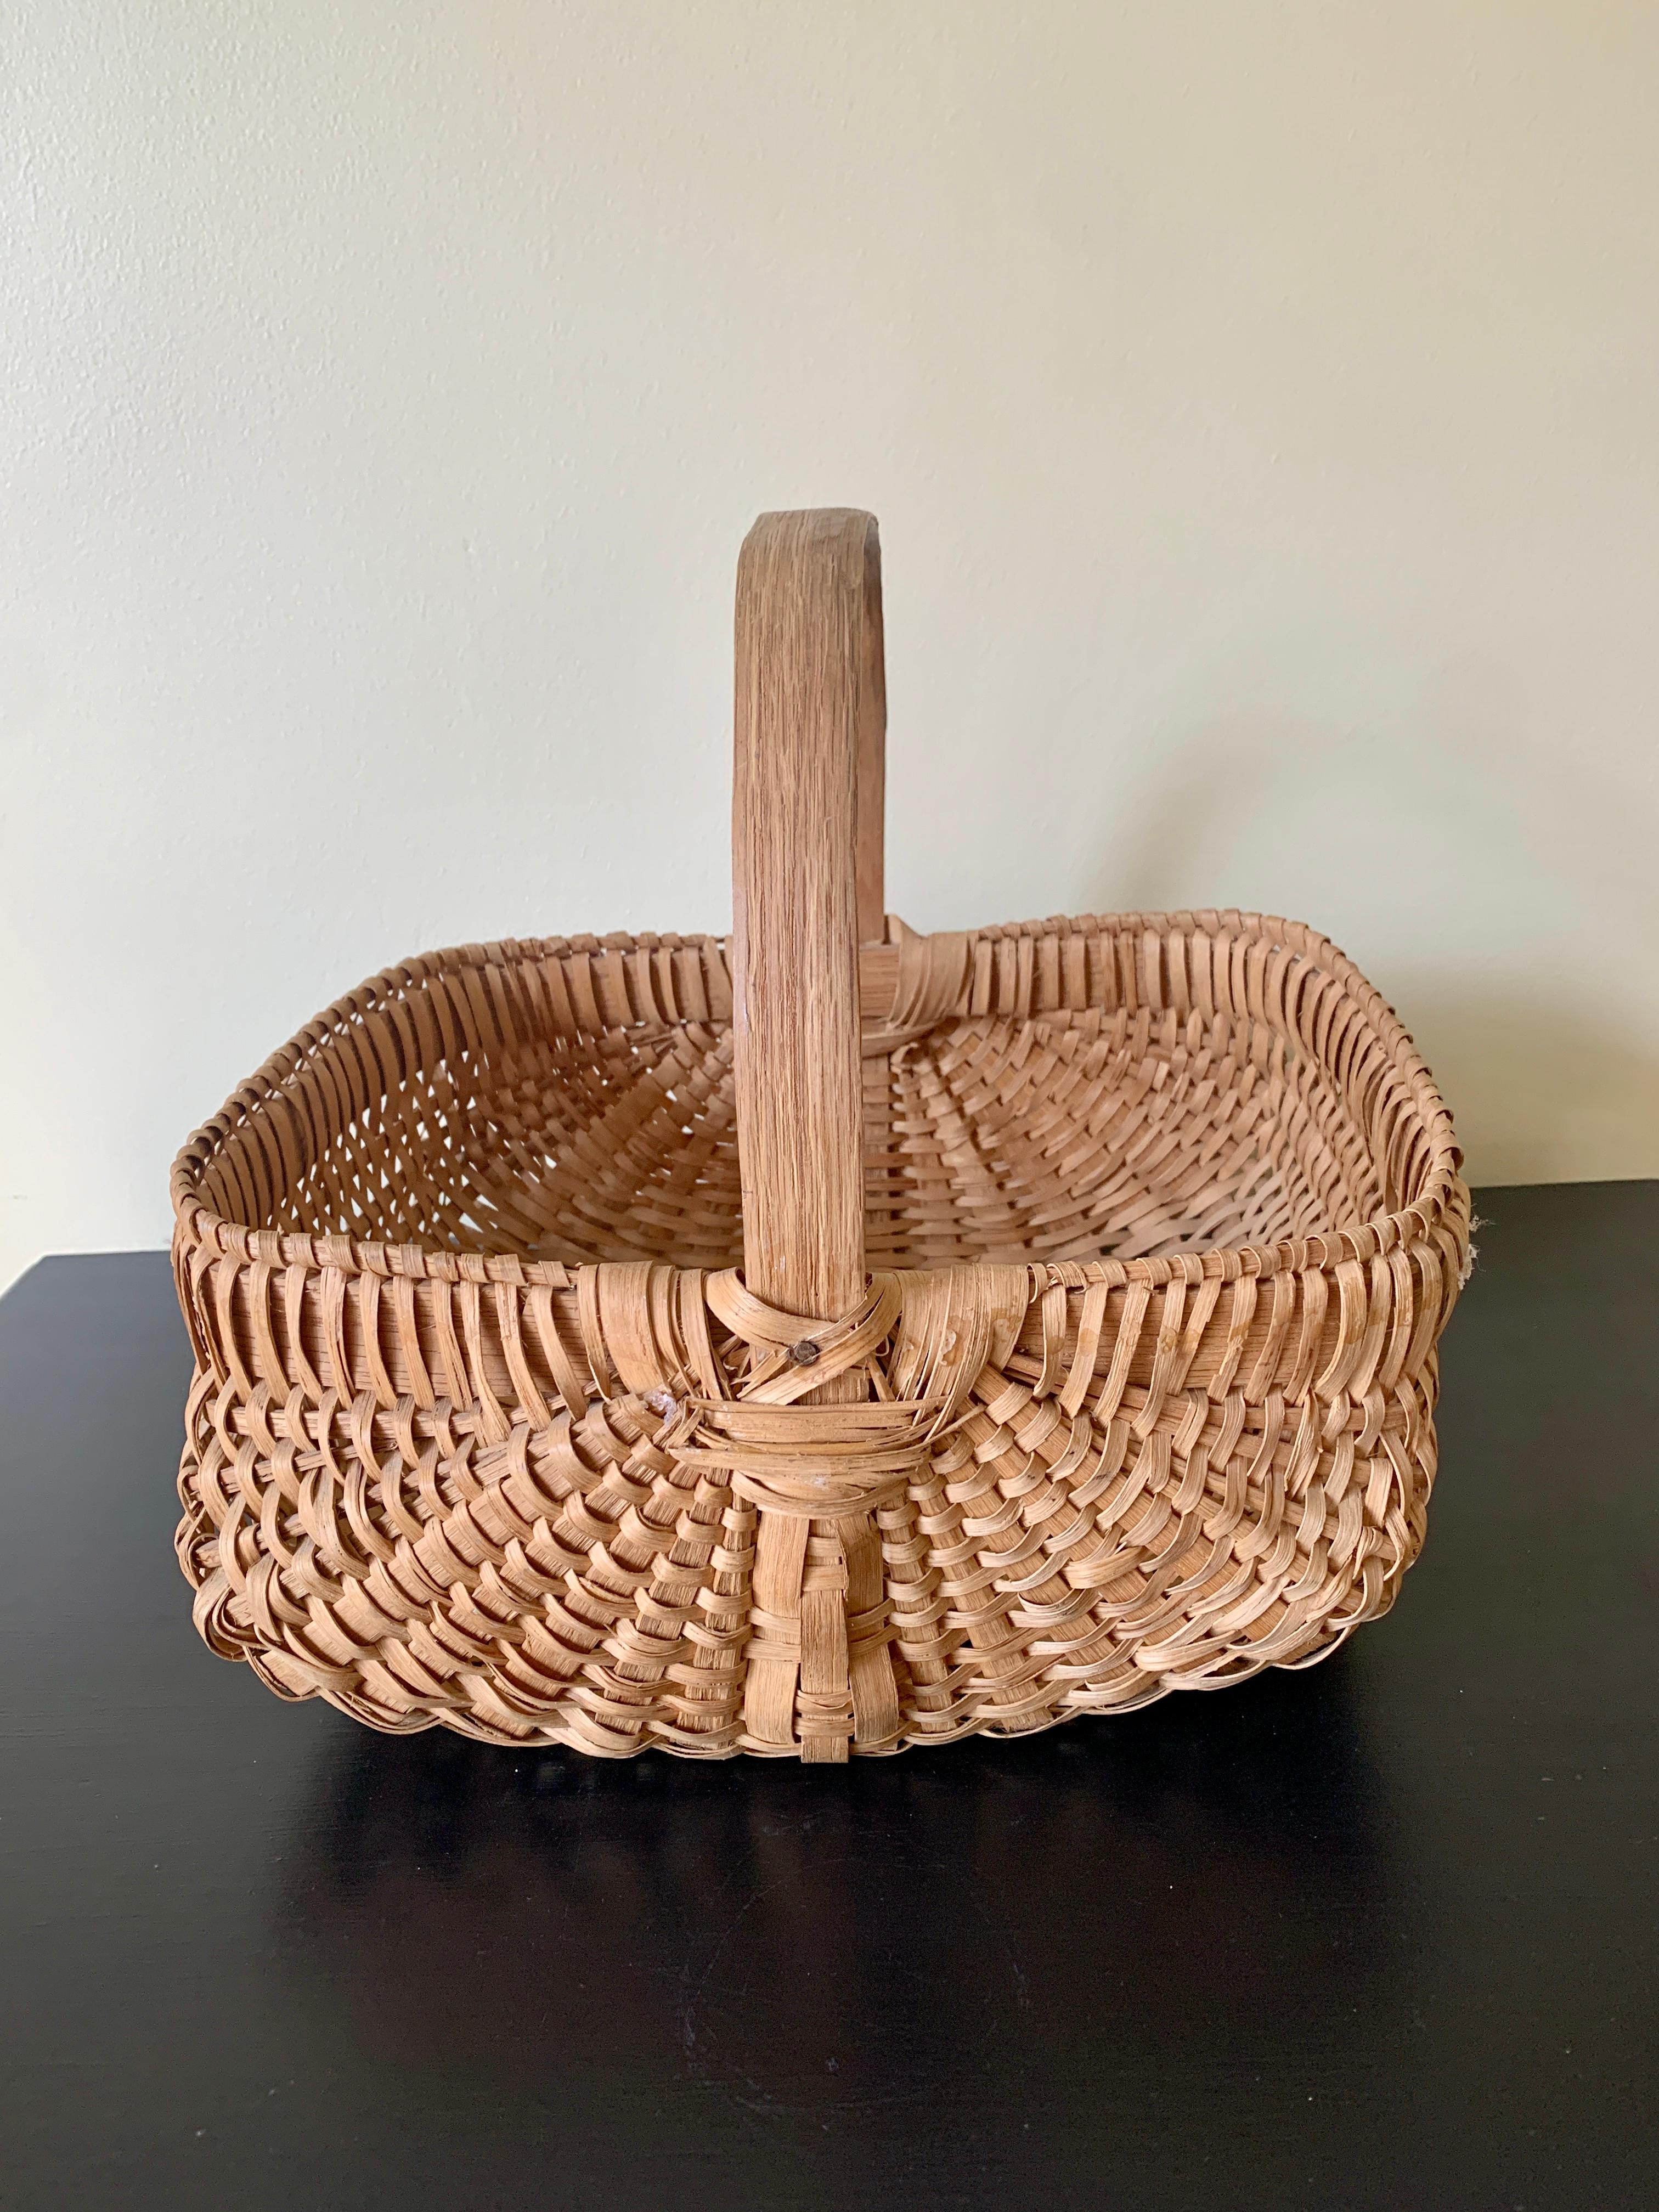 An antique American splint oak gathering basket. The charming basket has a tight weave and would be charming as a decorative or functional piece.

USA, Early 20th Century

Measures: 11.5